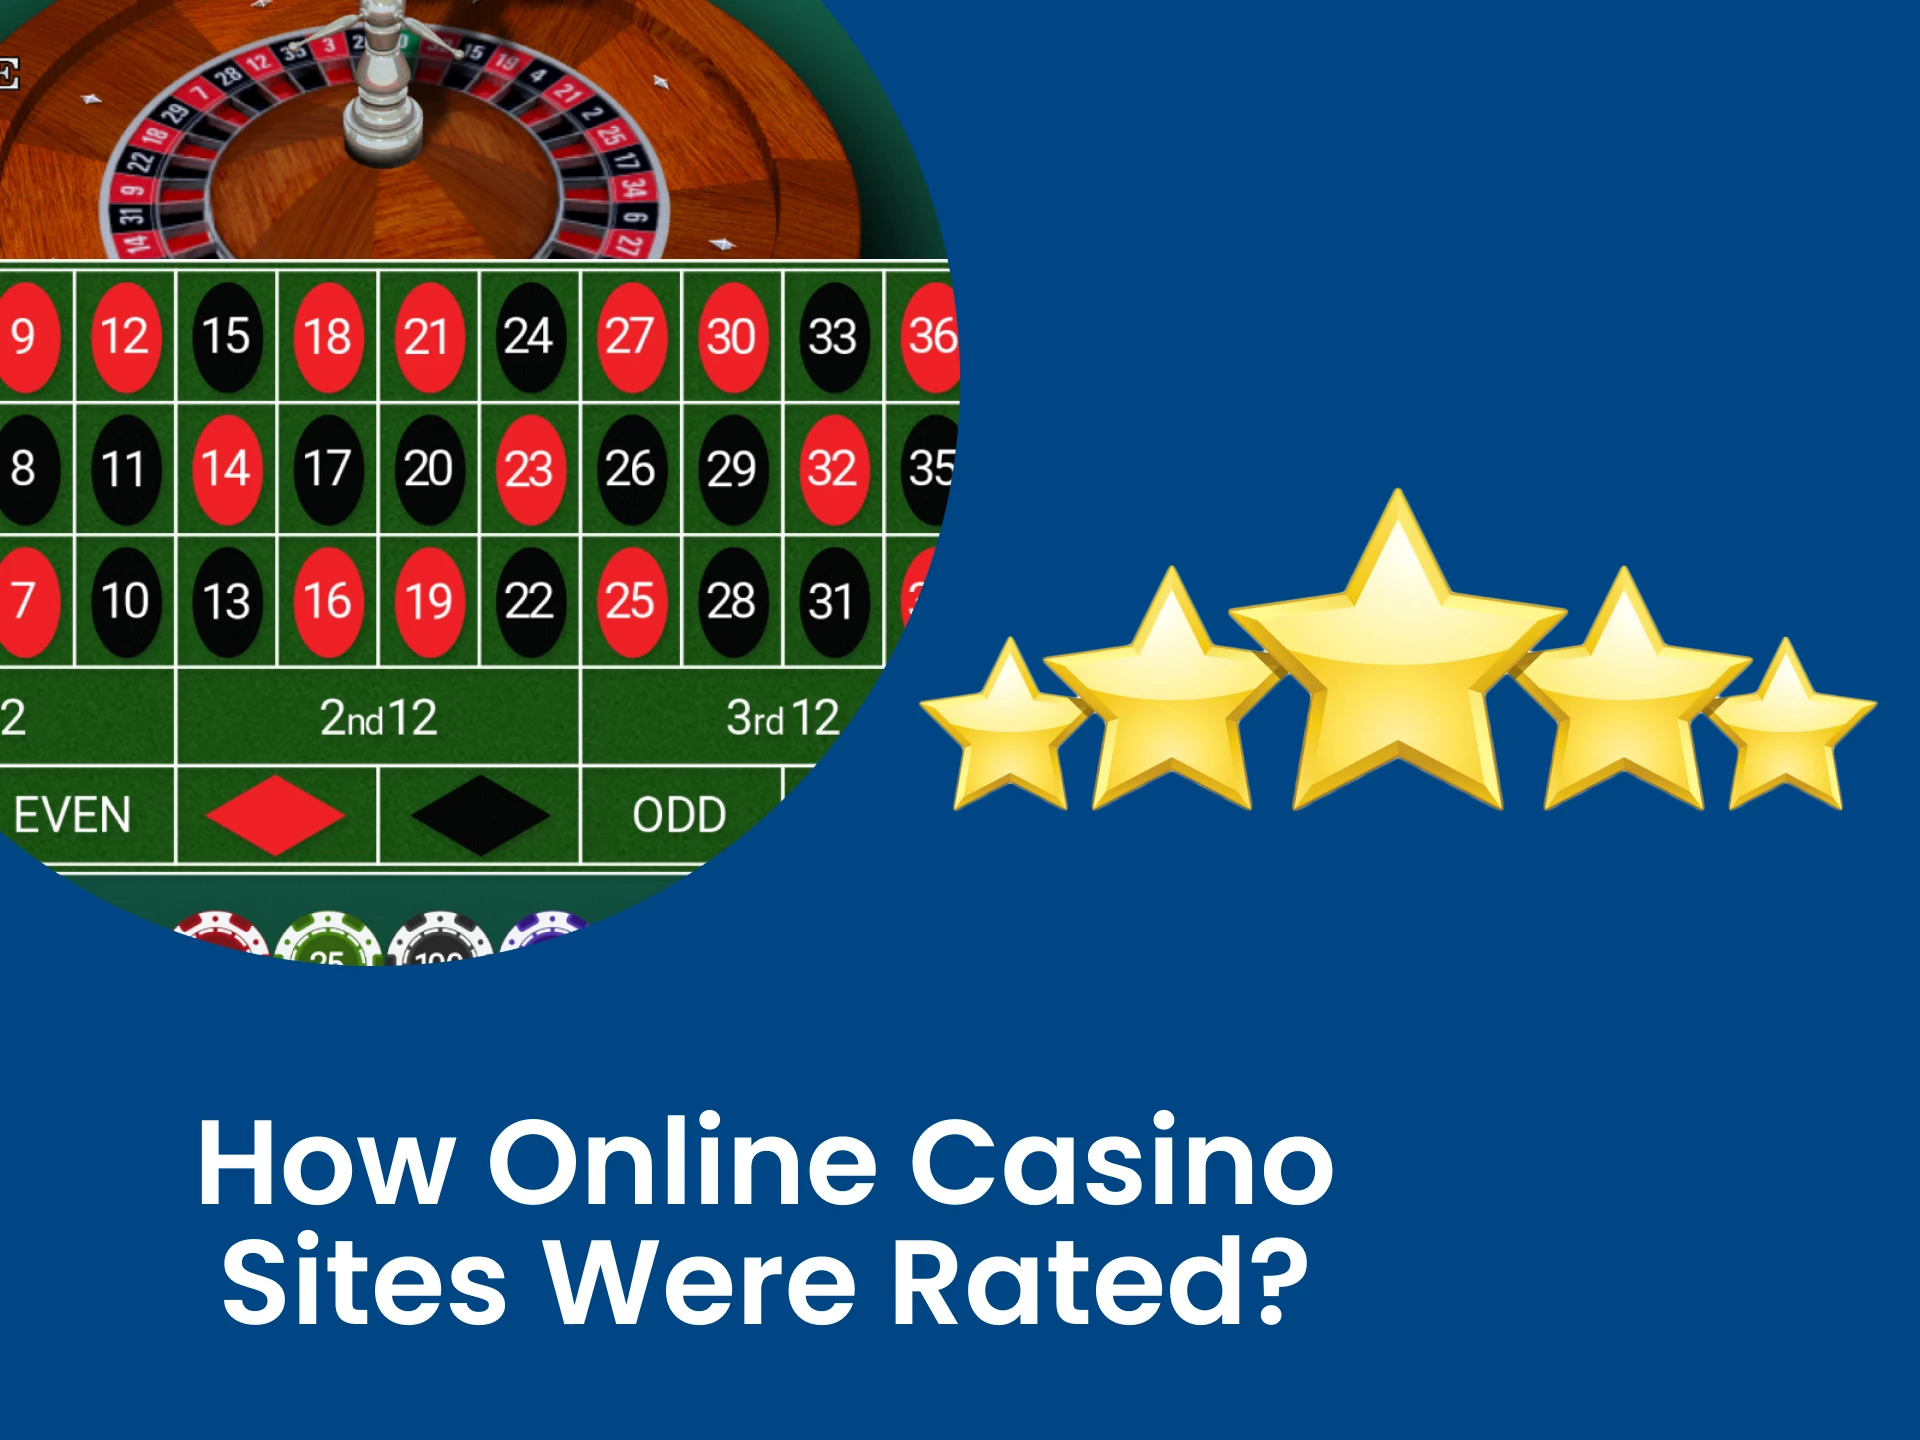 We will tell you the best way to find a site to play roulette.